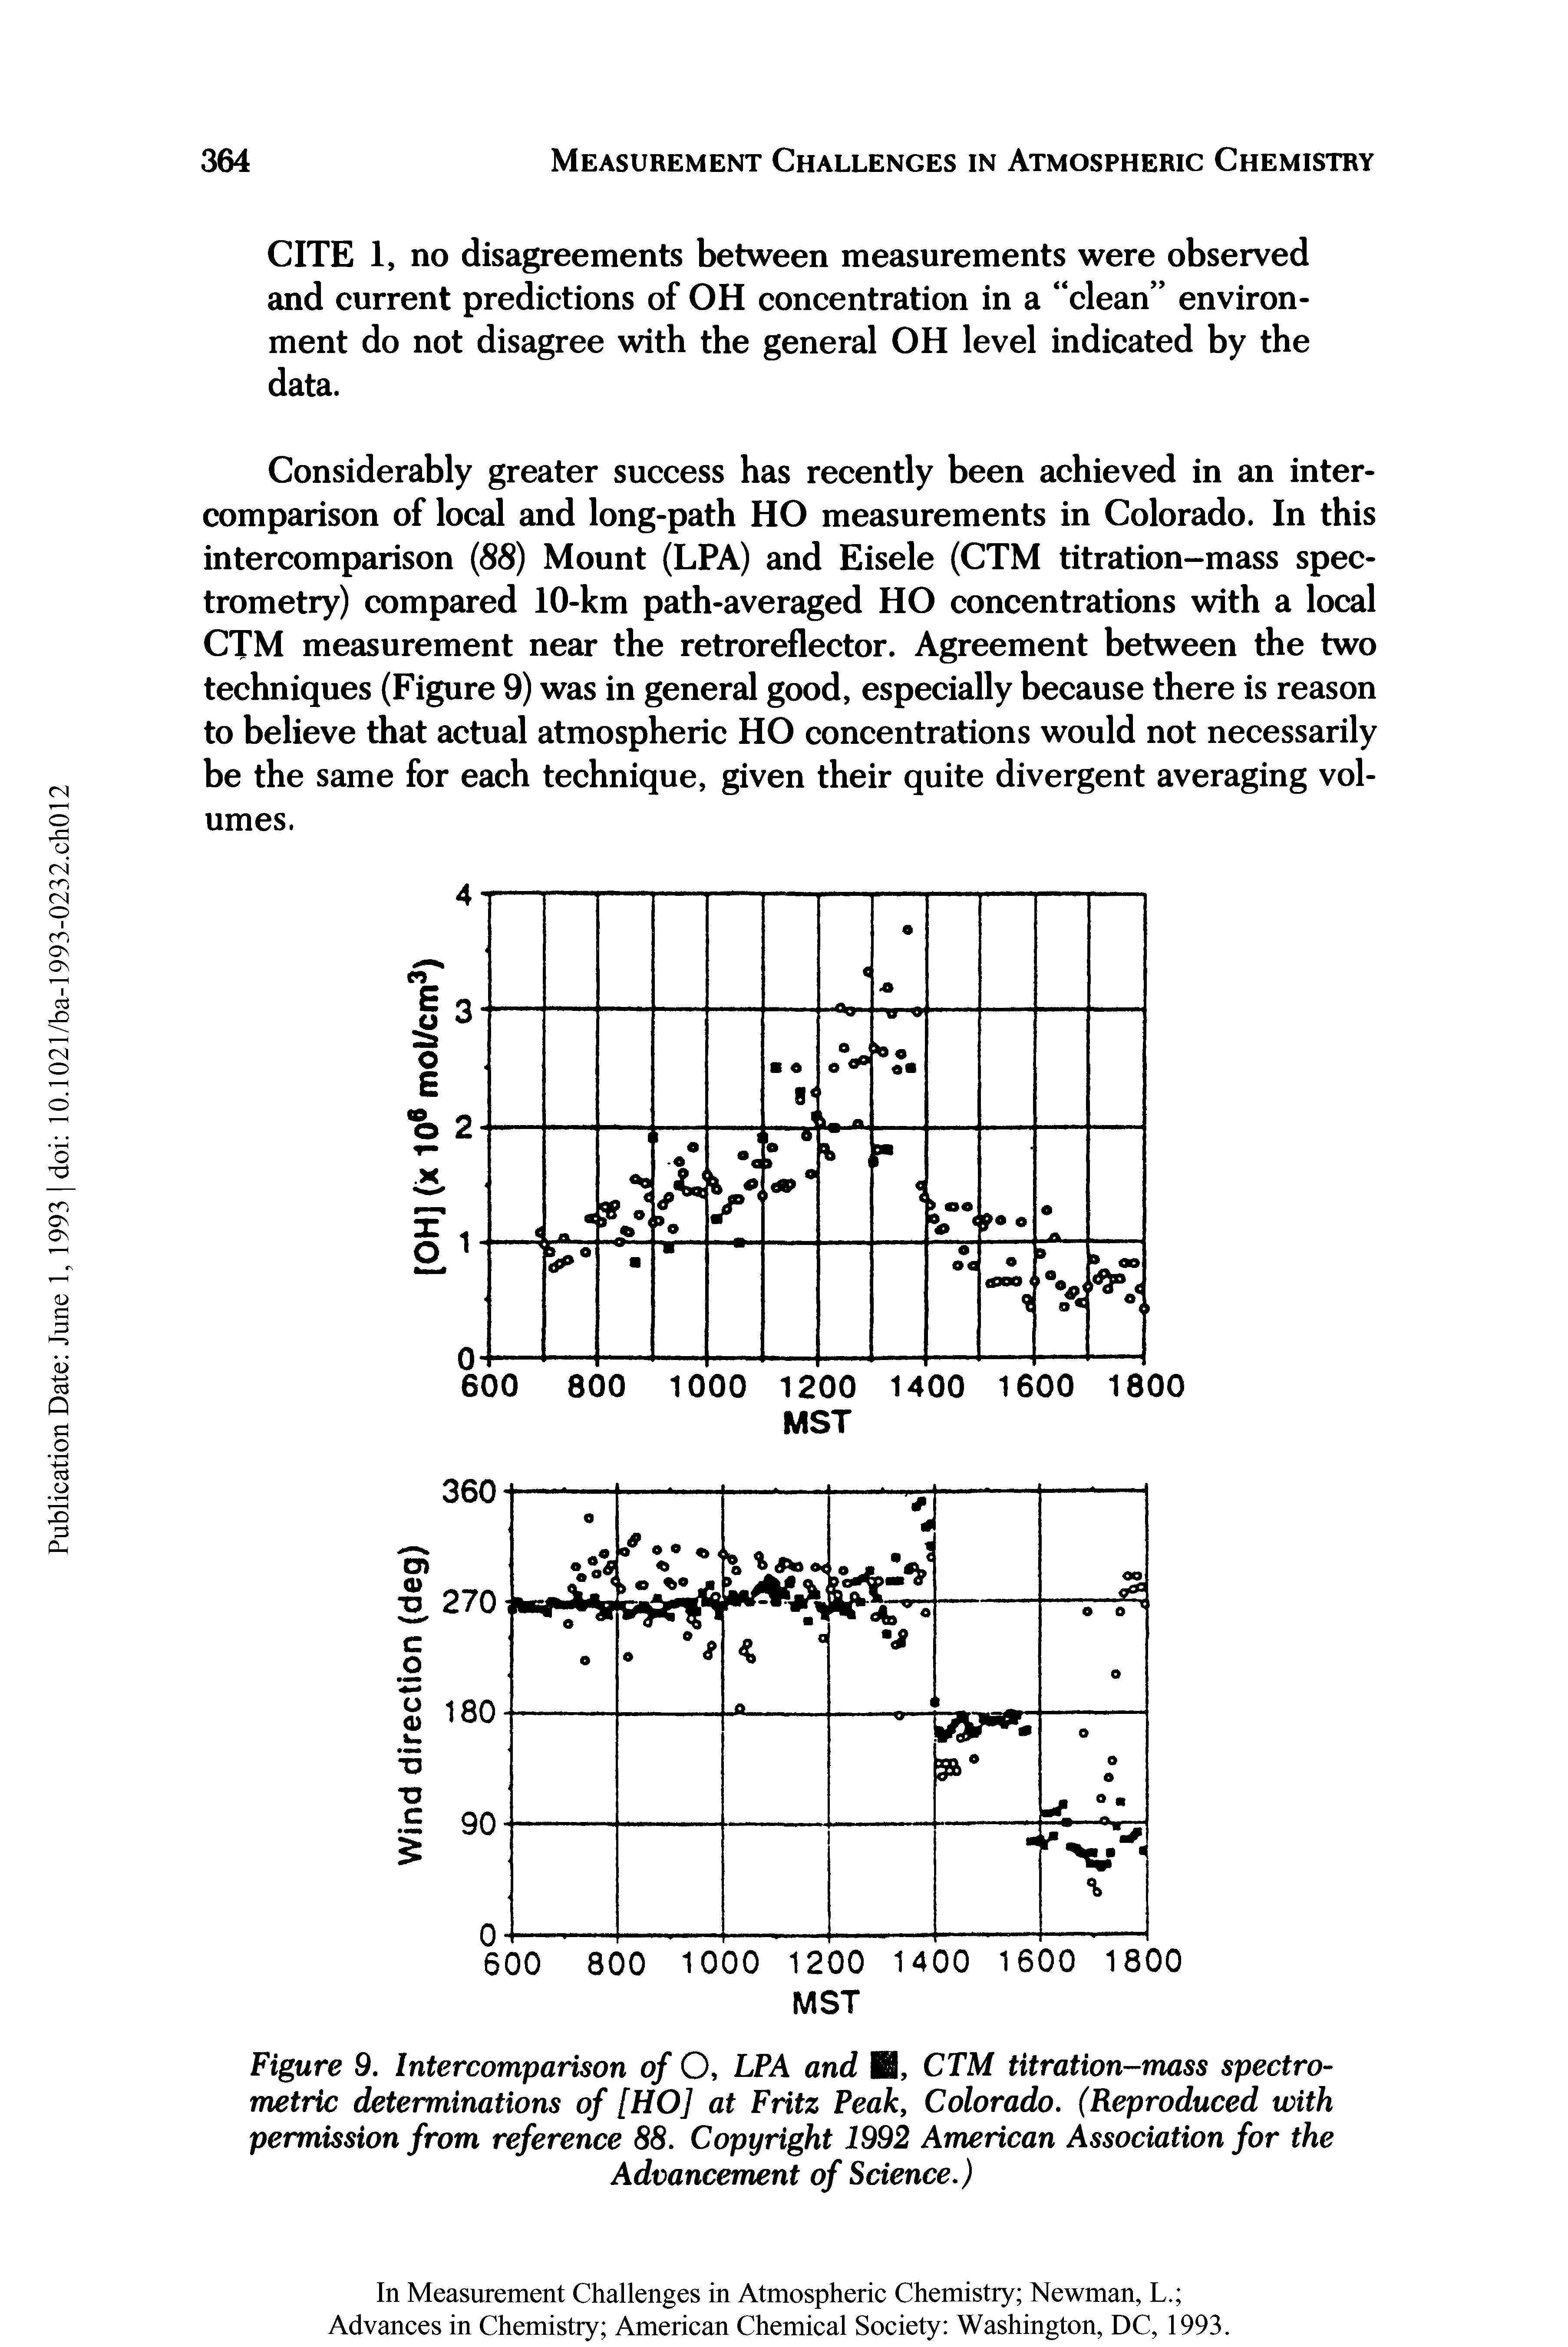 Figure 9. Intercomparison of O, LPA and H, CTM titration-mass spectro-metric determinations of [HO] at Fritz Peak, Colorado. (Reproduced with permission from reference 88. Copyright 1992 American Association for the Advancement of Science.)...